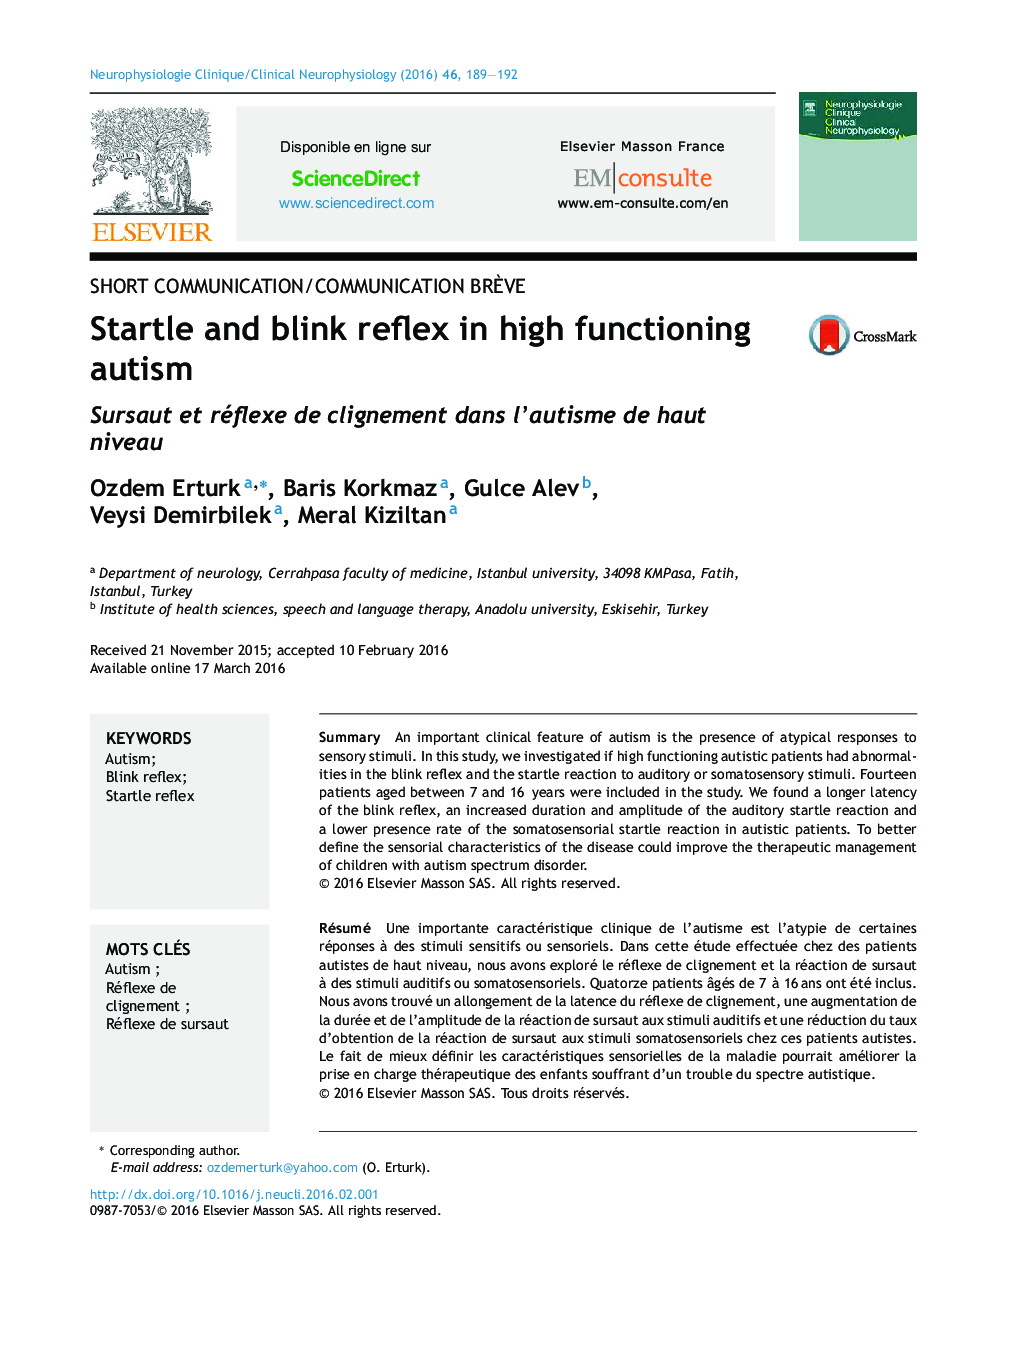 Startle and blink reflex in high functioning autism